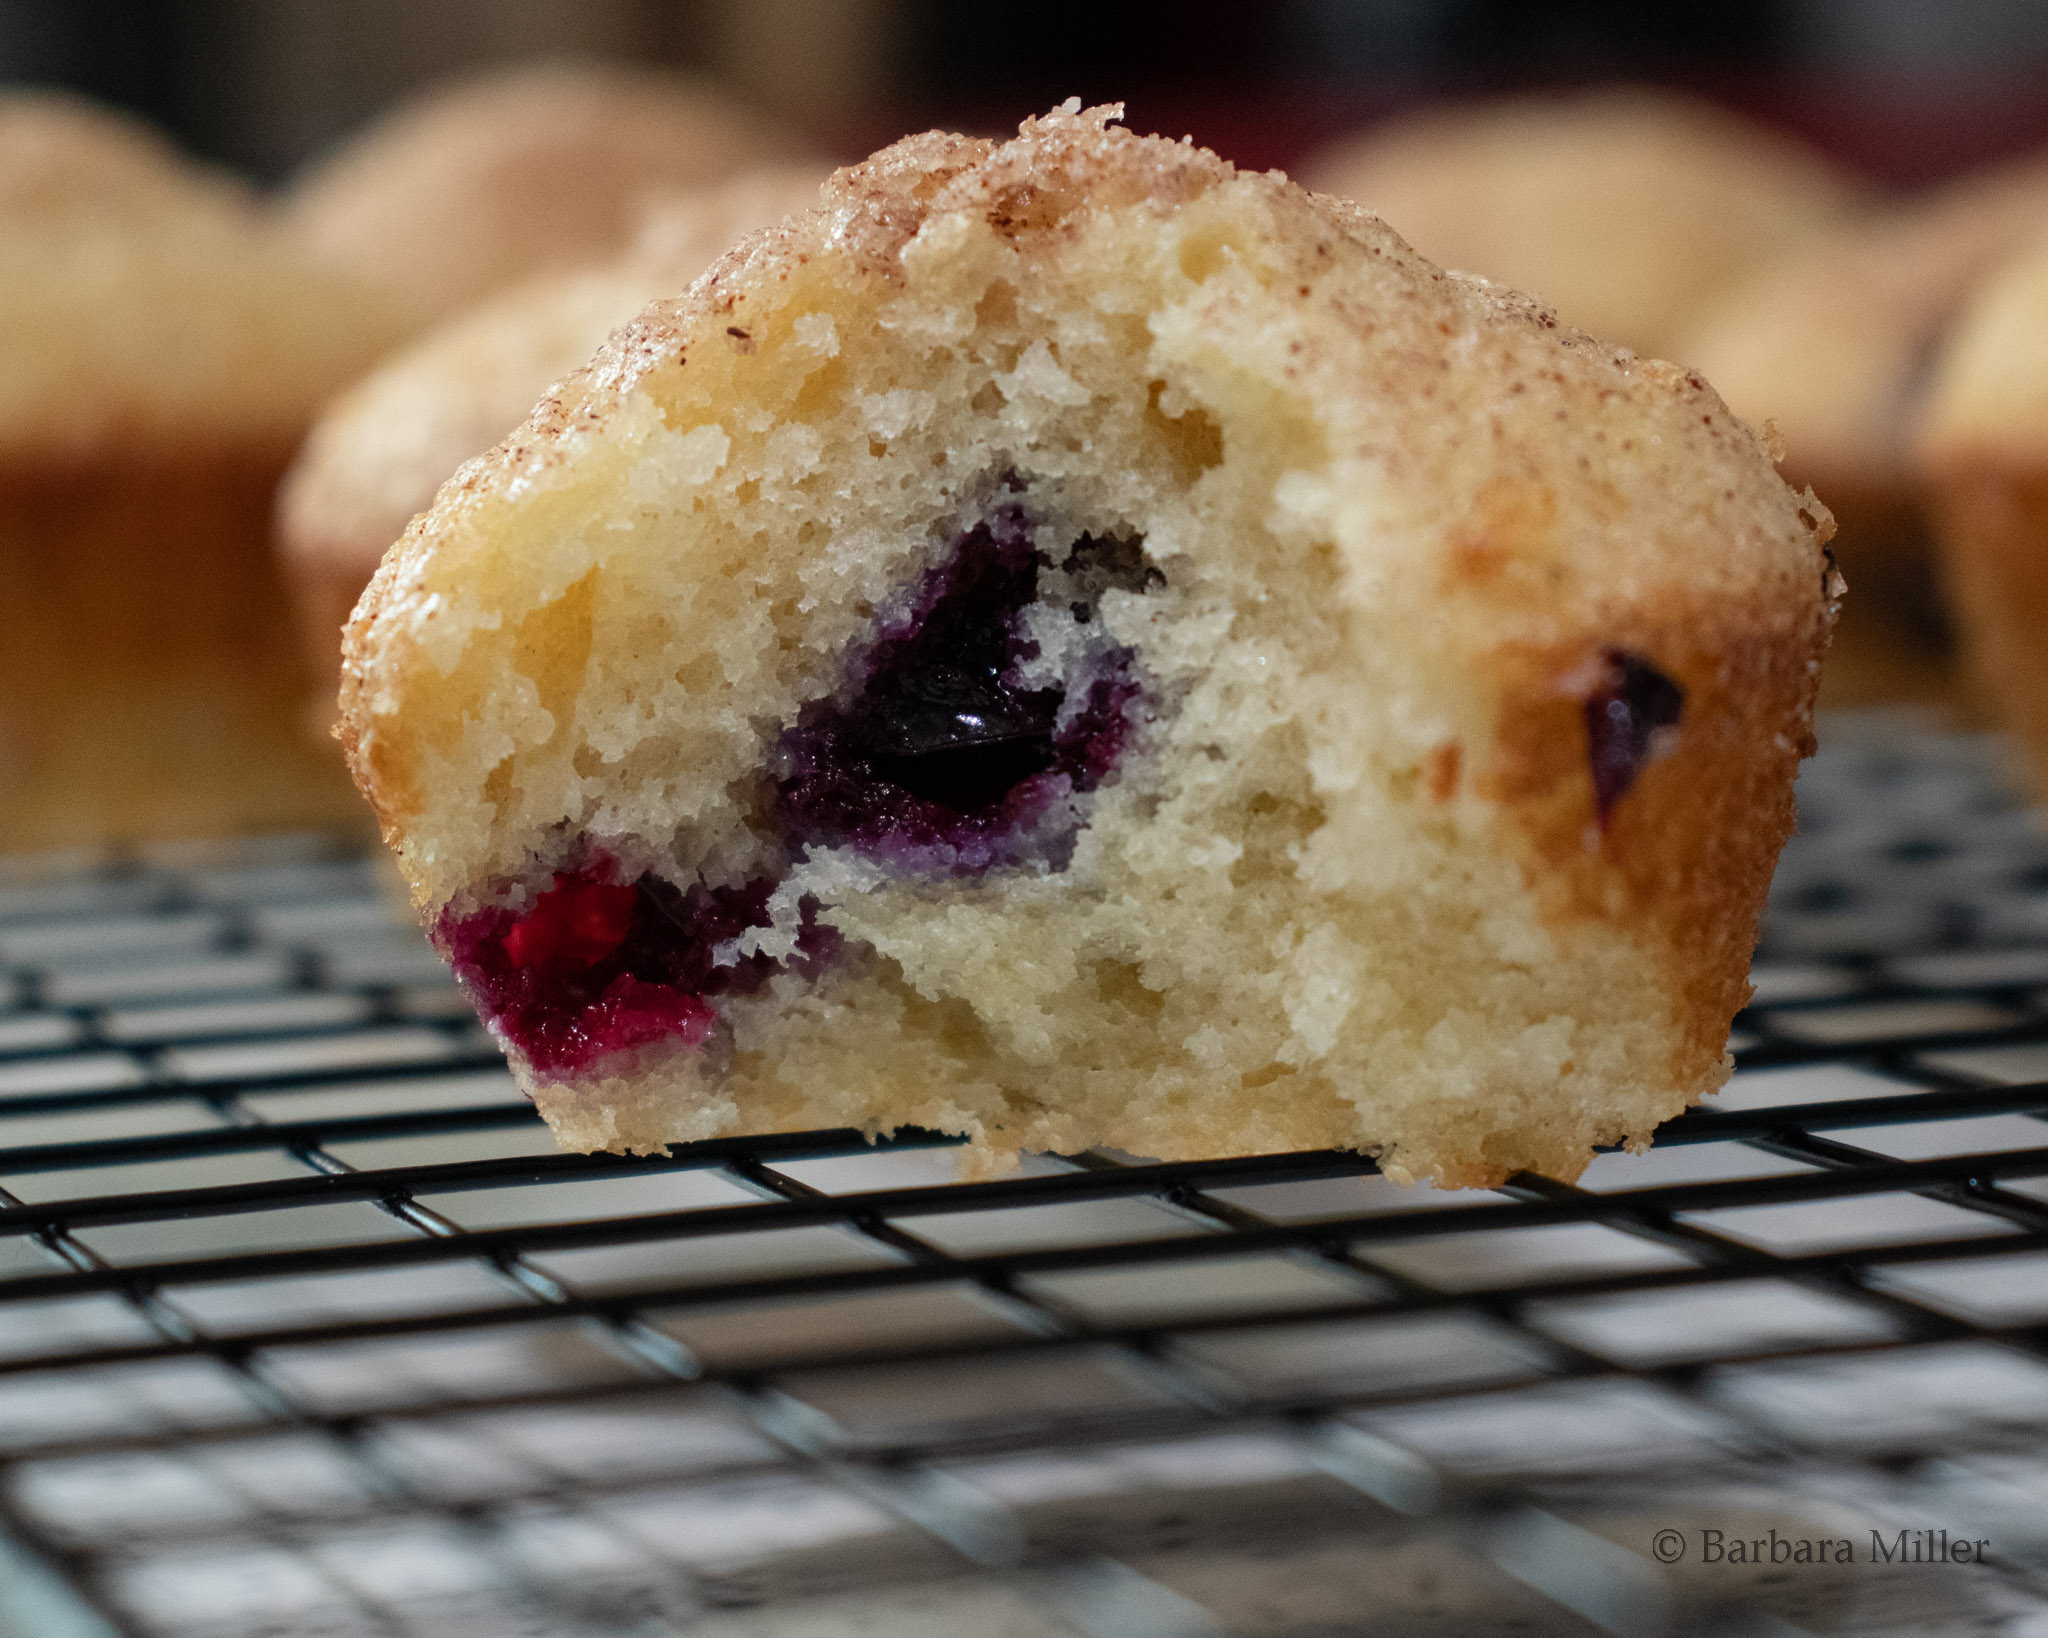 A blueberry muffin with a bite out of it on a cooling rack with more blueberry muffins in the background.